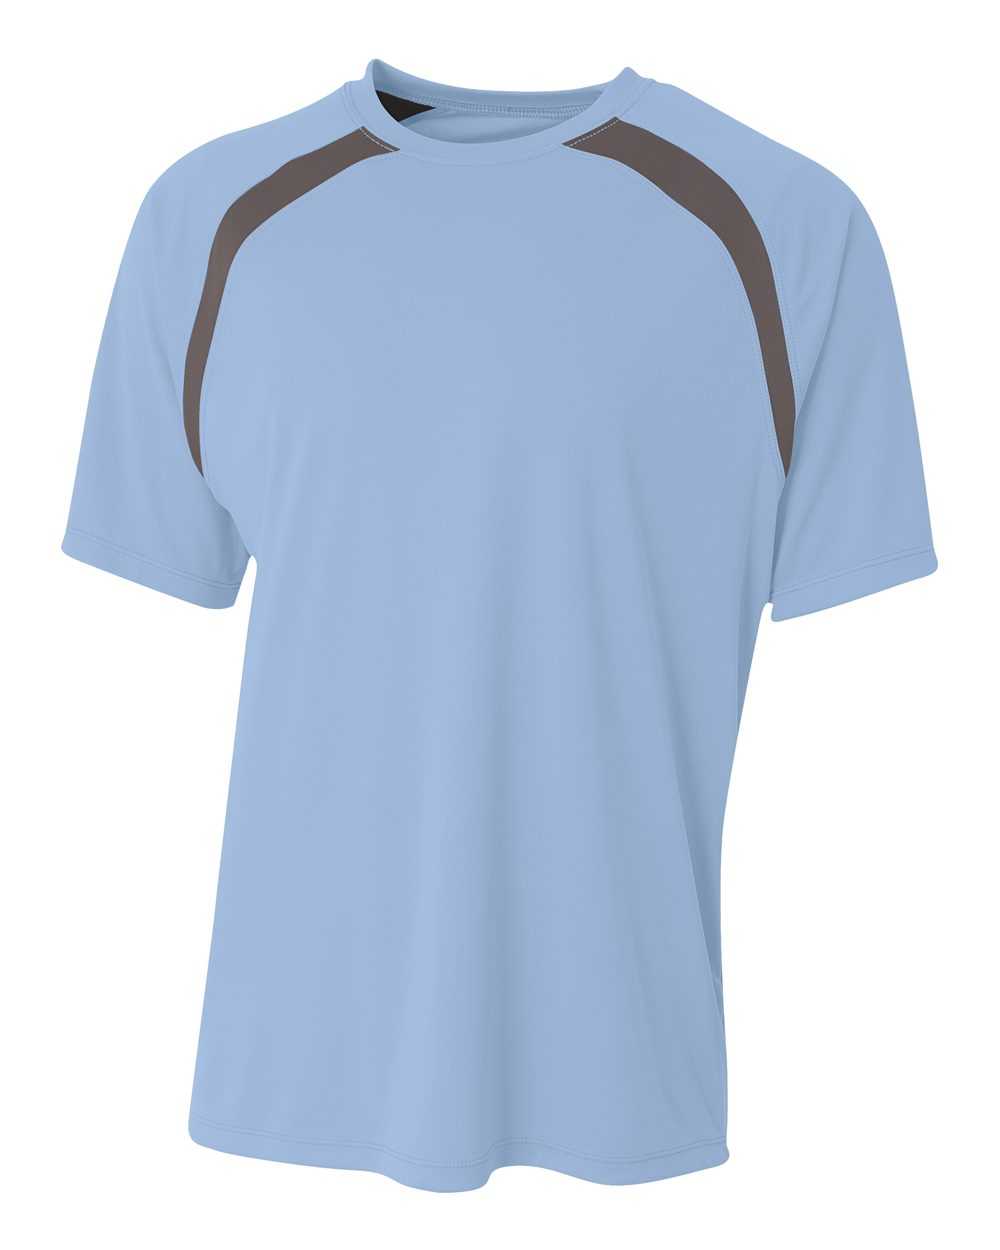 A4 NB3001 Youth Spartan Short Sleeve Color Block Crew - Light Blue Graphite - HIT a Double